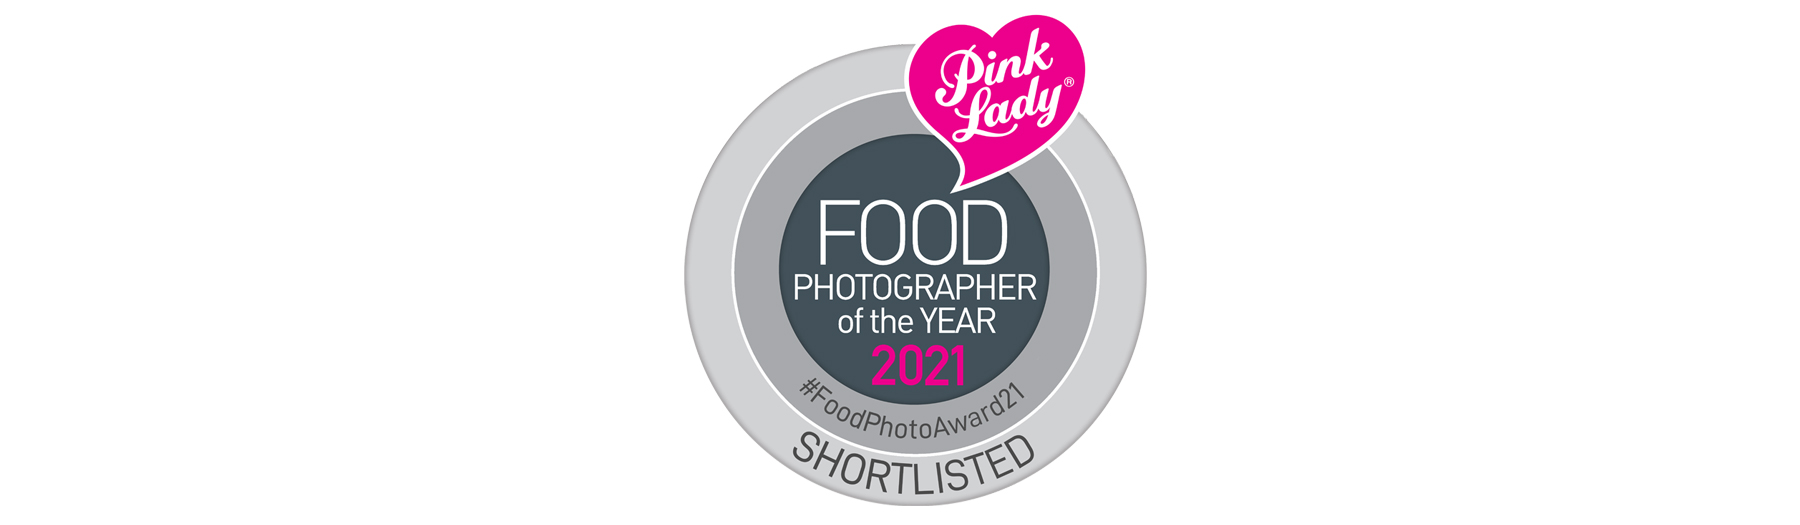 Pink Lady Food Photographer of the Year 2021・Commended・Manja Wachsmuth